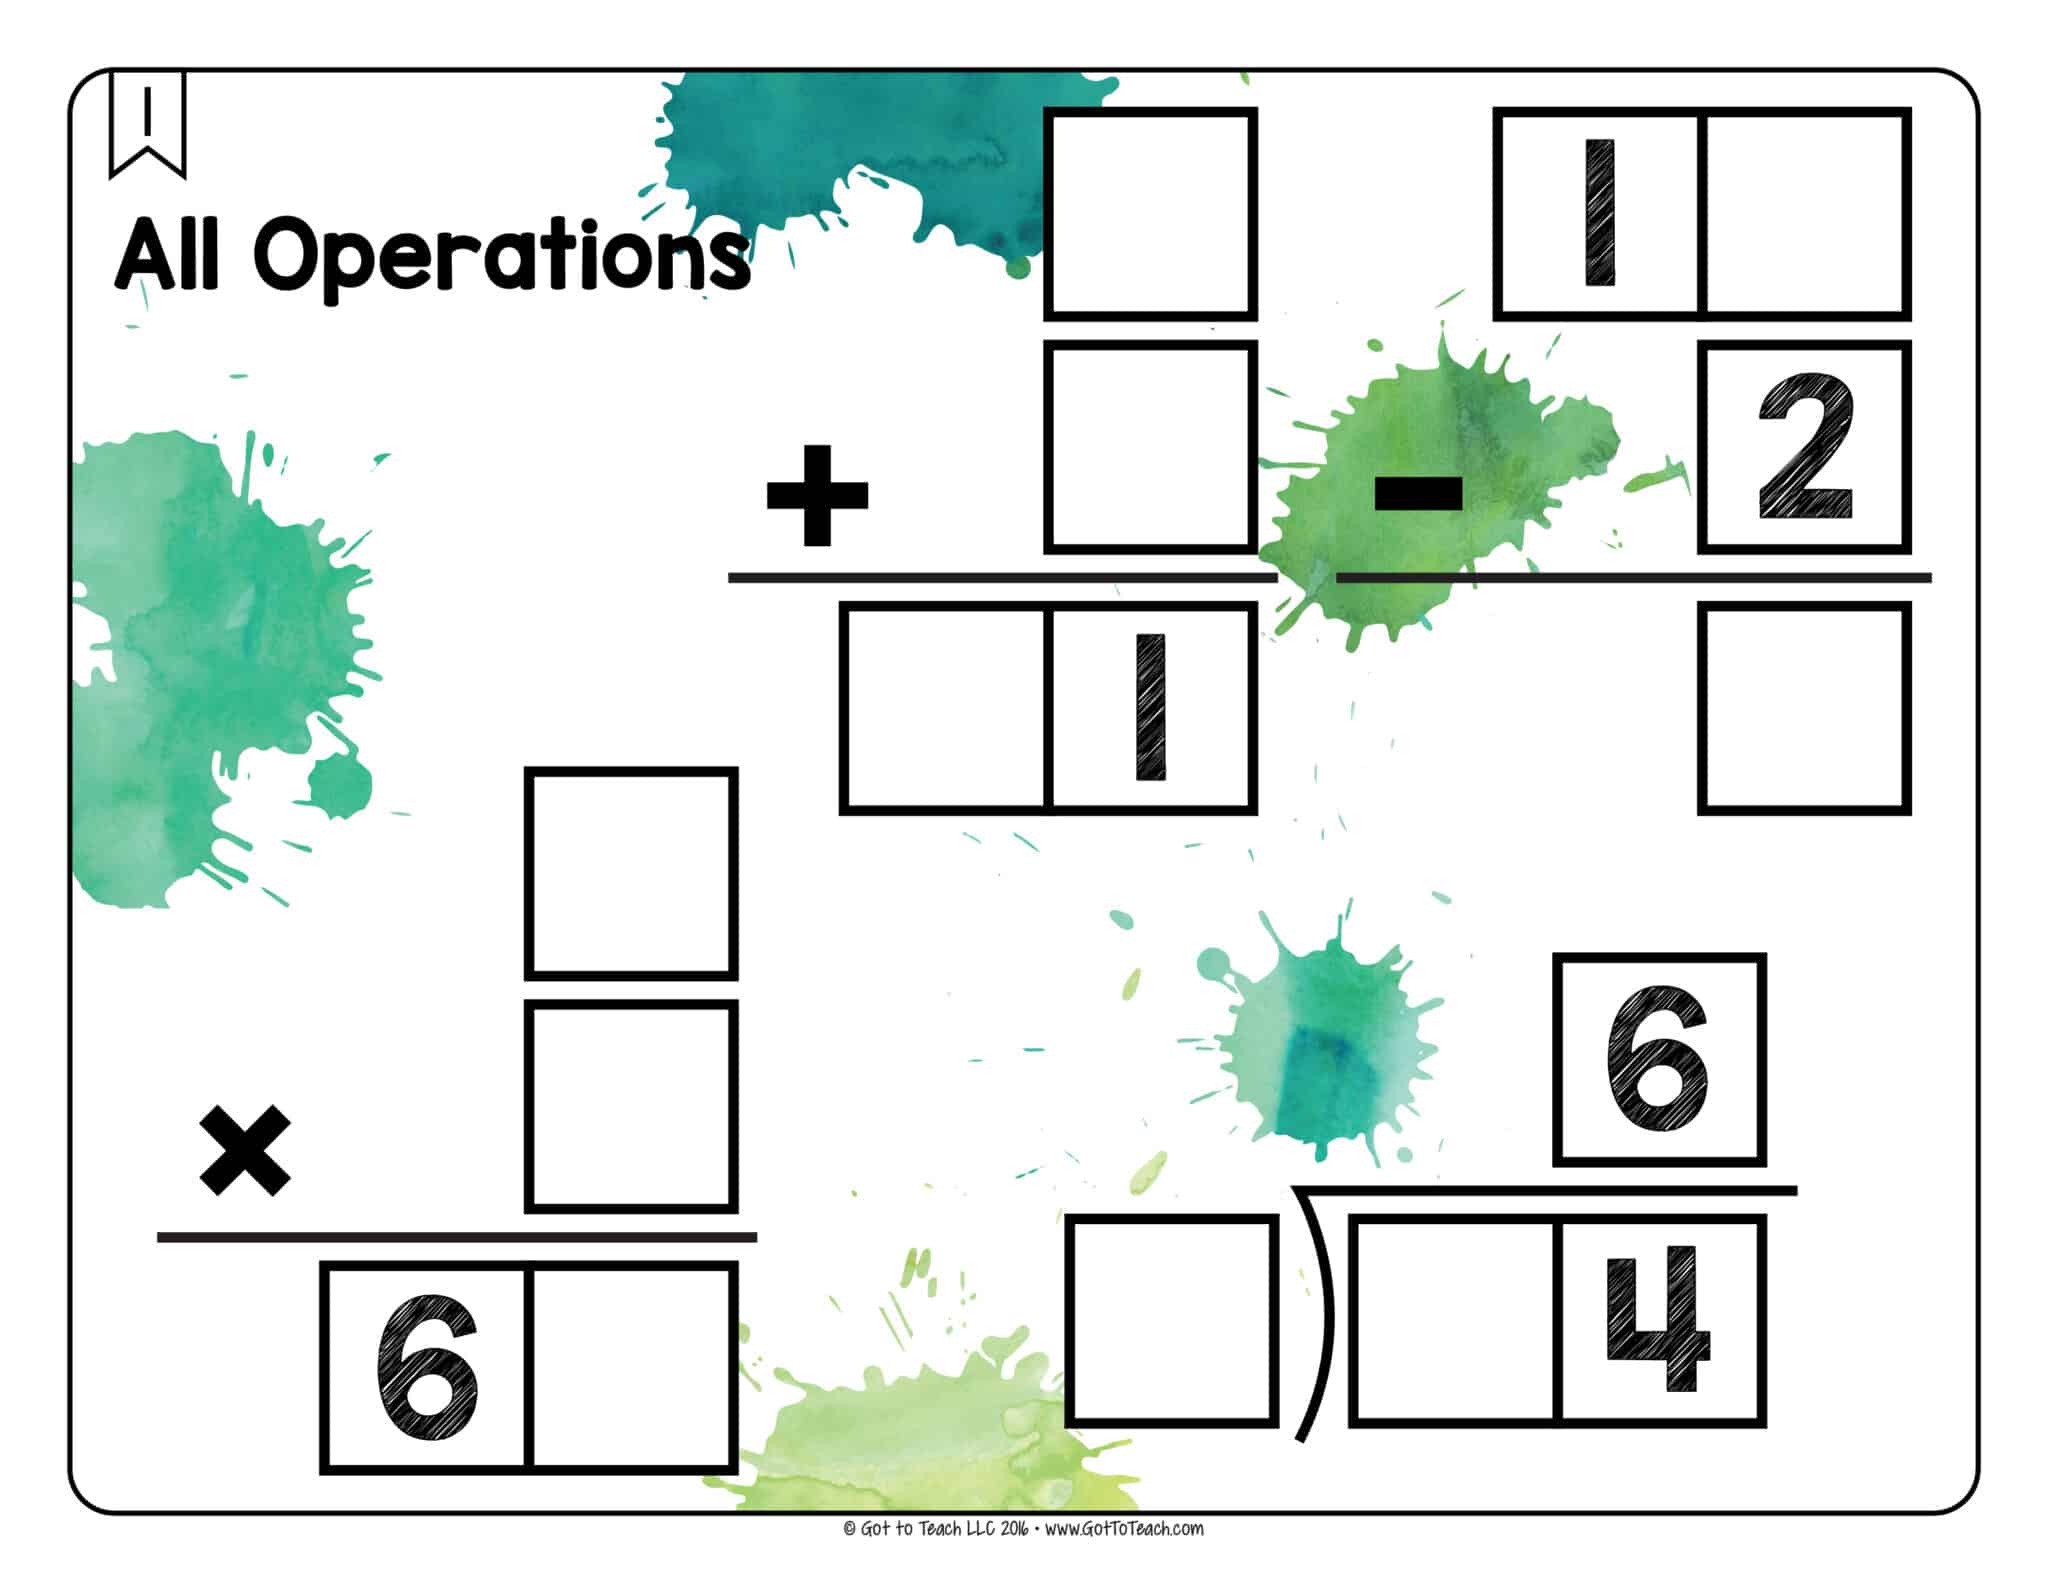 All Operations (Add, Subtract, Multiply & Divide)